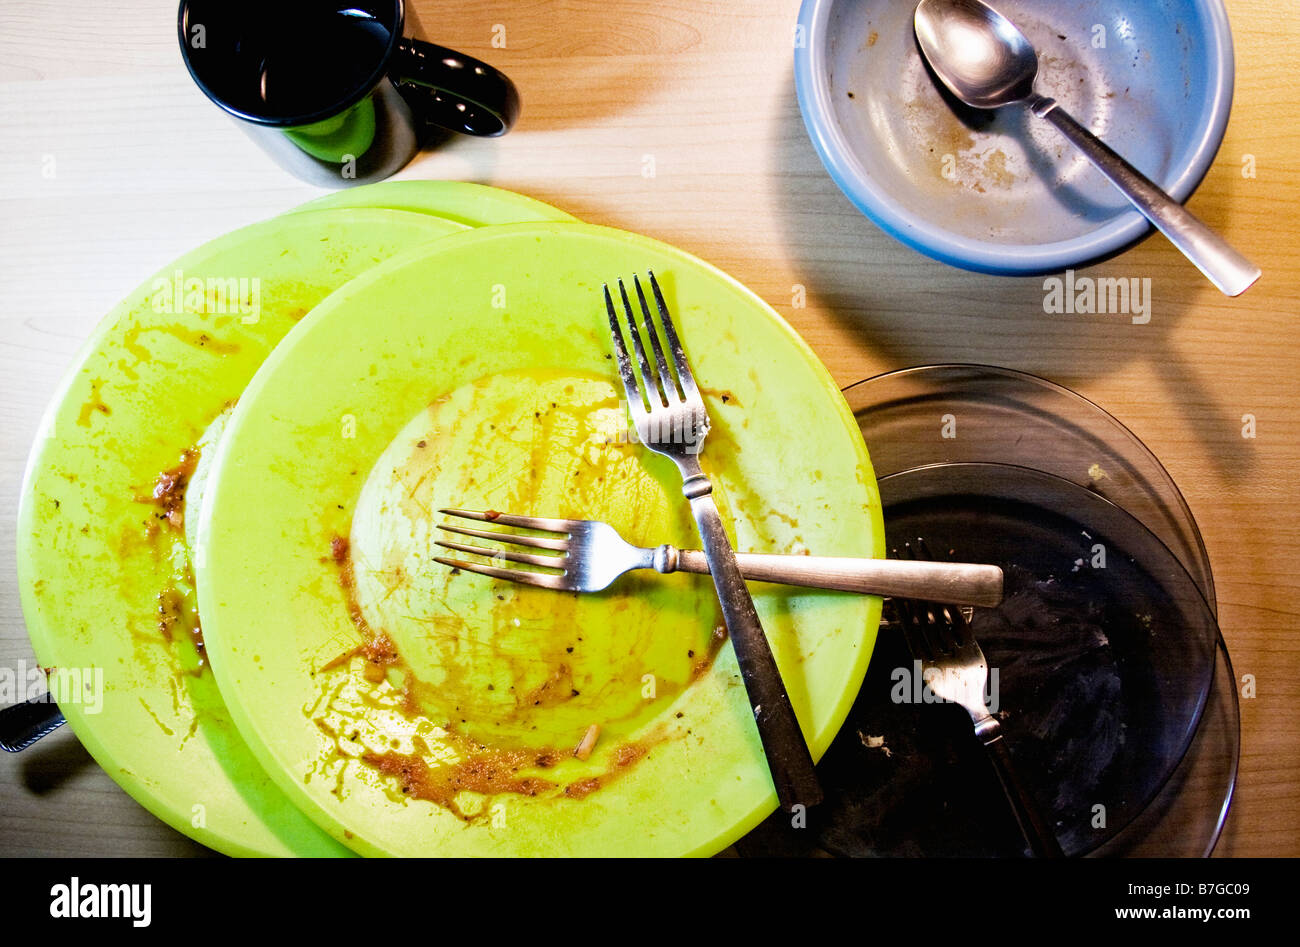 Finished meal with dirty dishes. Stock Photo